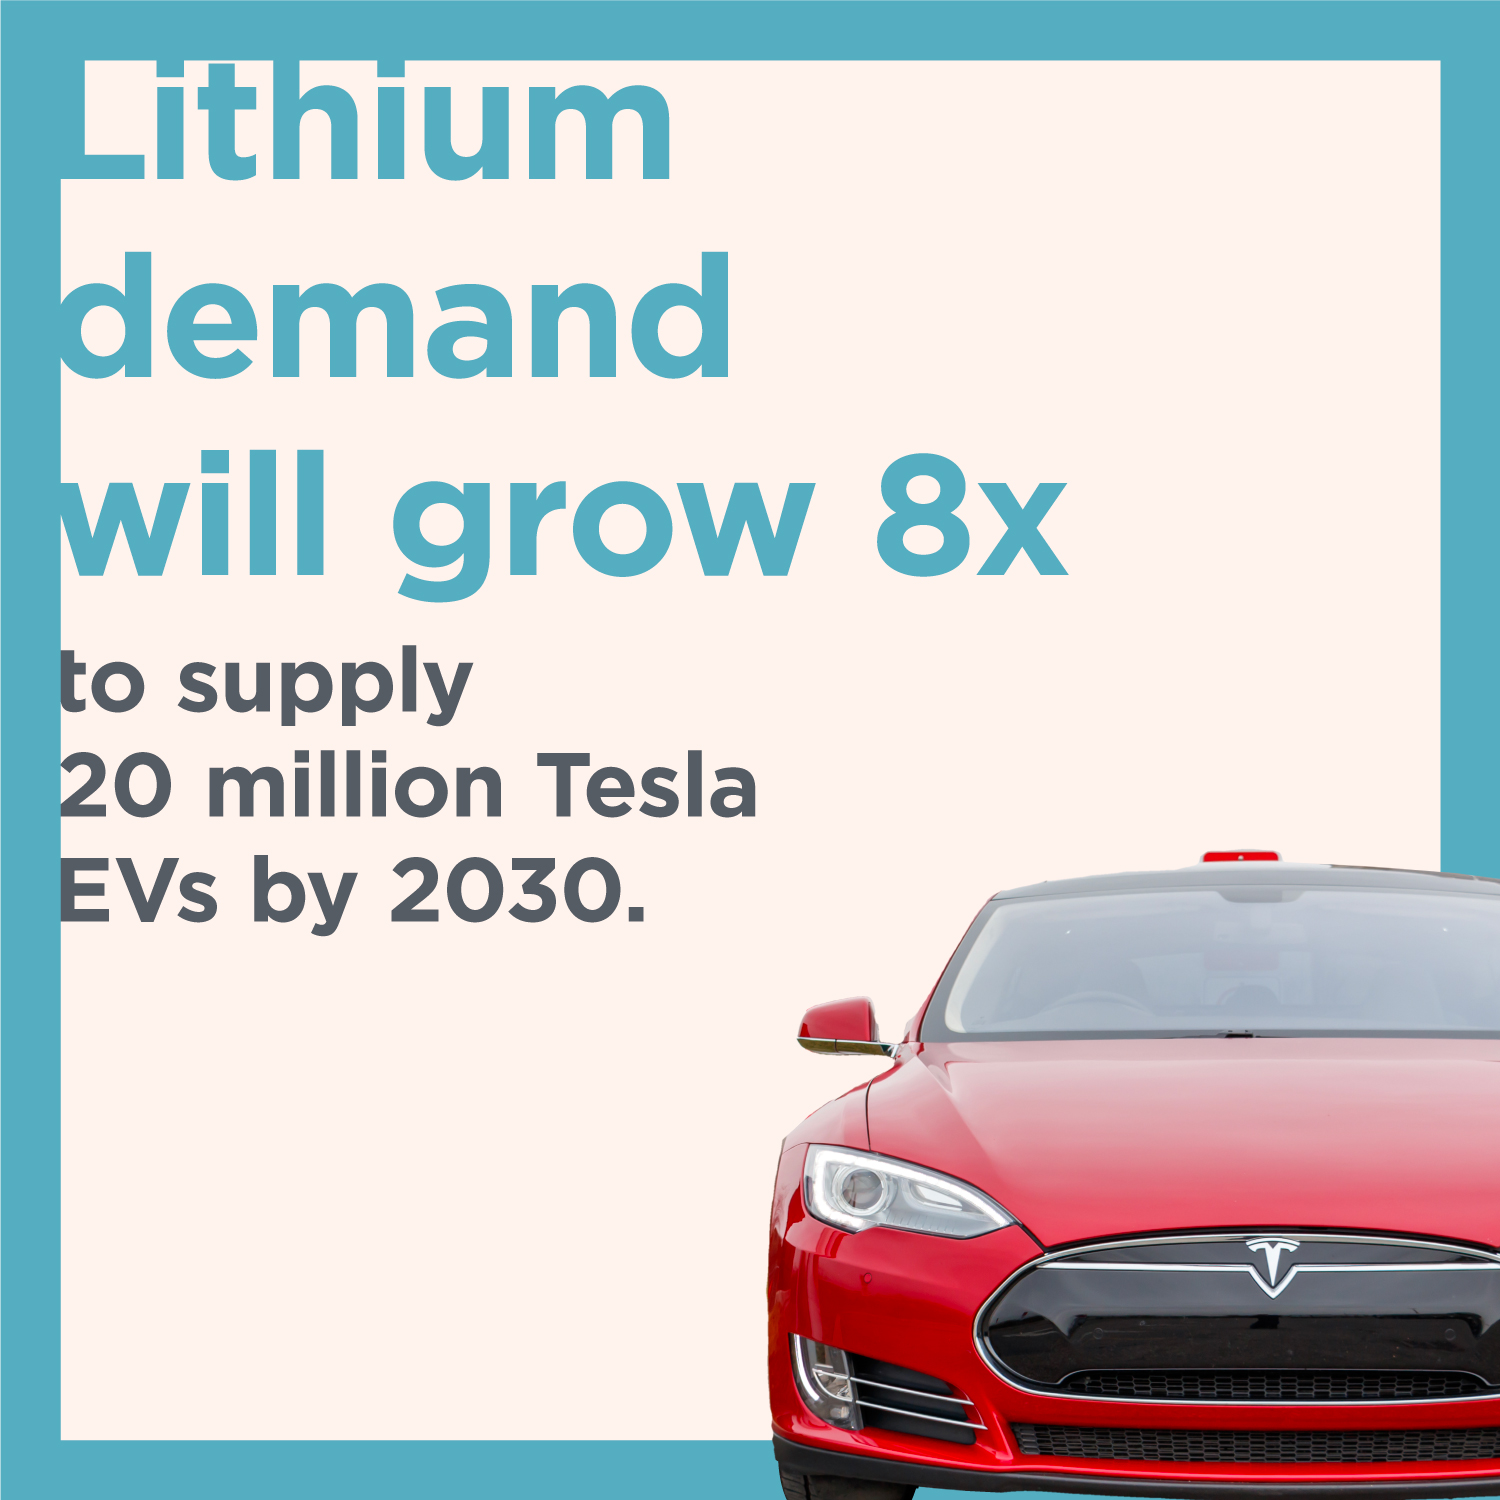 Lithium demand will grow 8x to supply 20 million Tesla EVs by 2030.